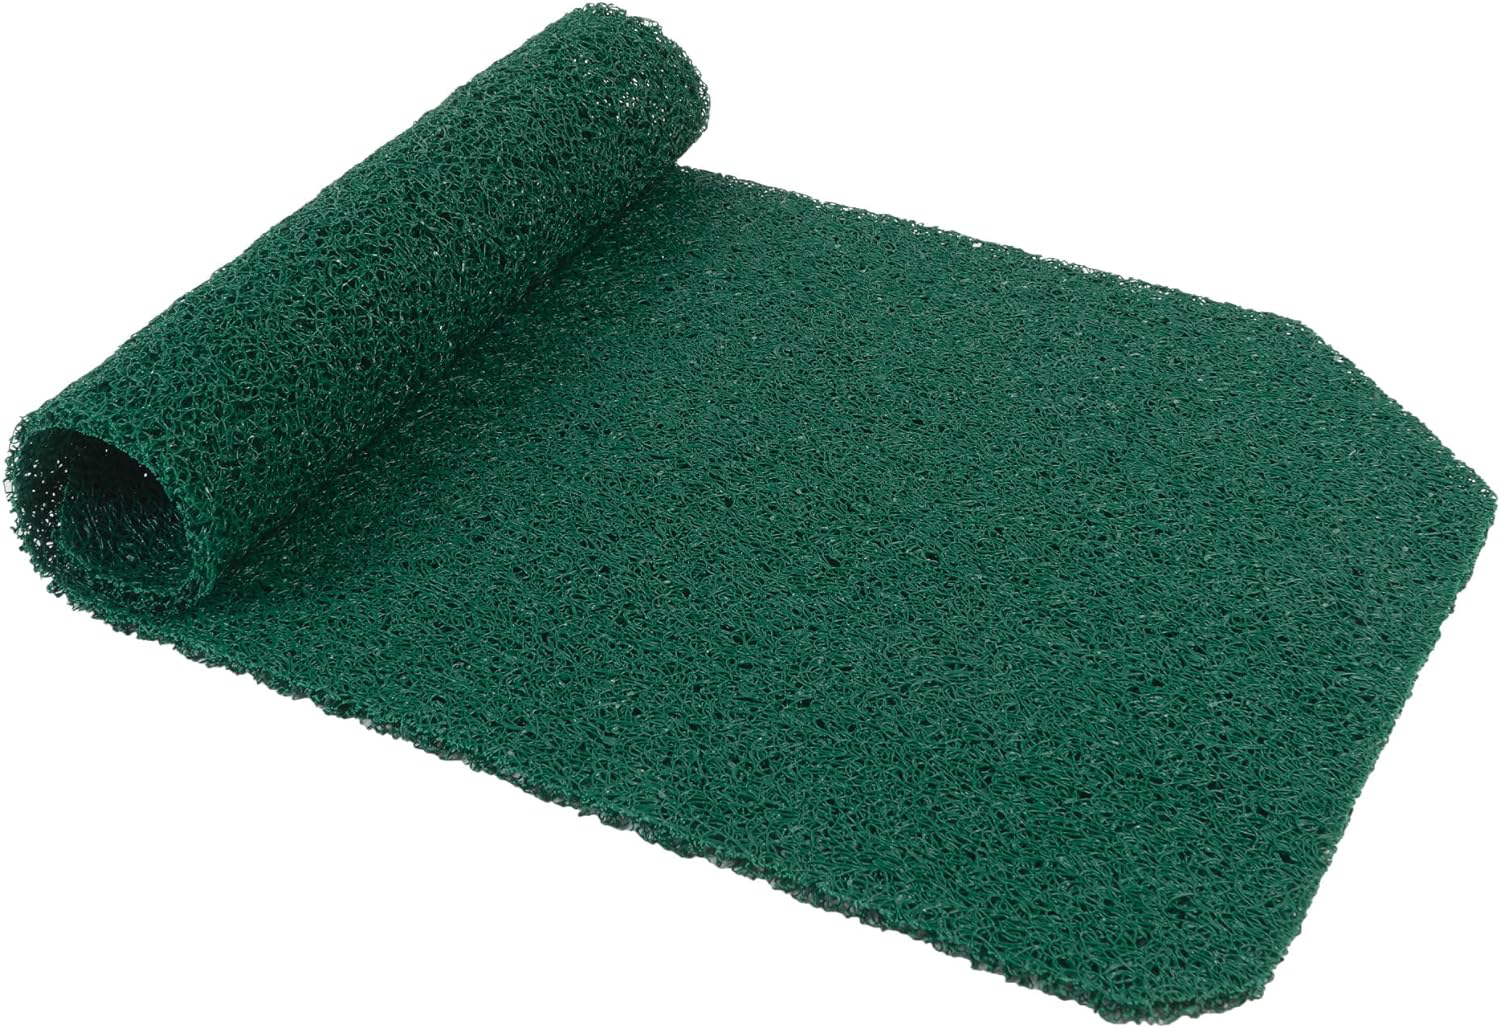 PetSafe Replacement Grass for Piddle Place Indoor Dog Potty Training review 